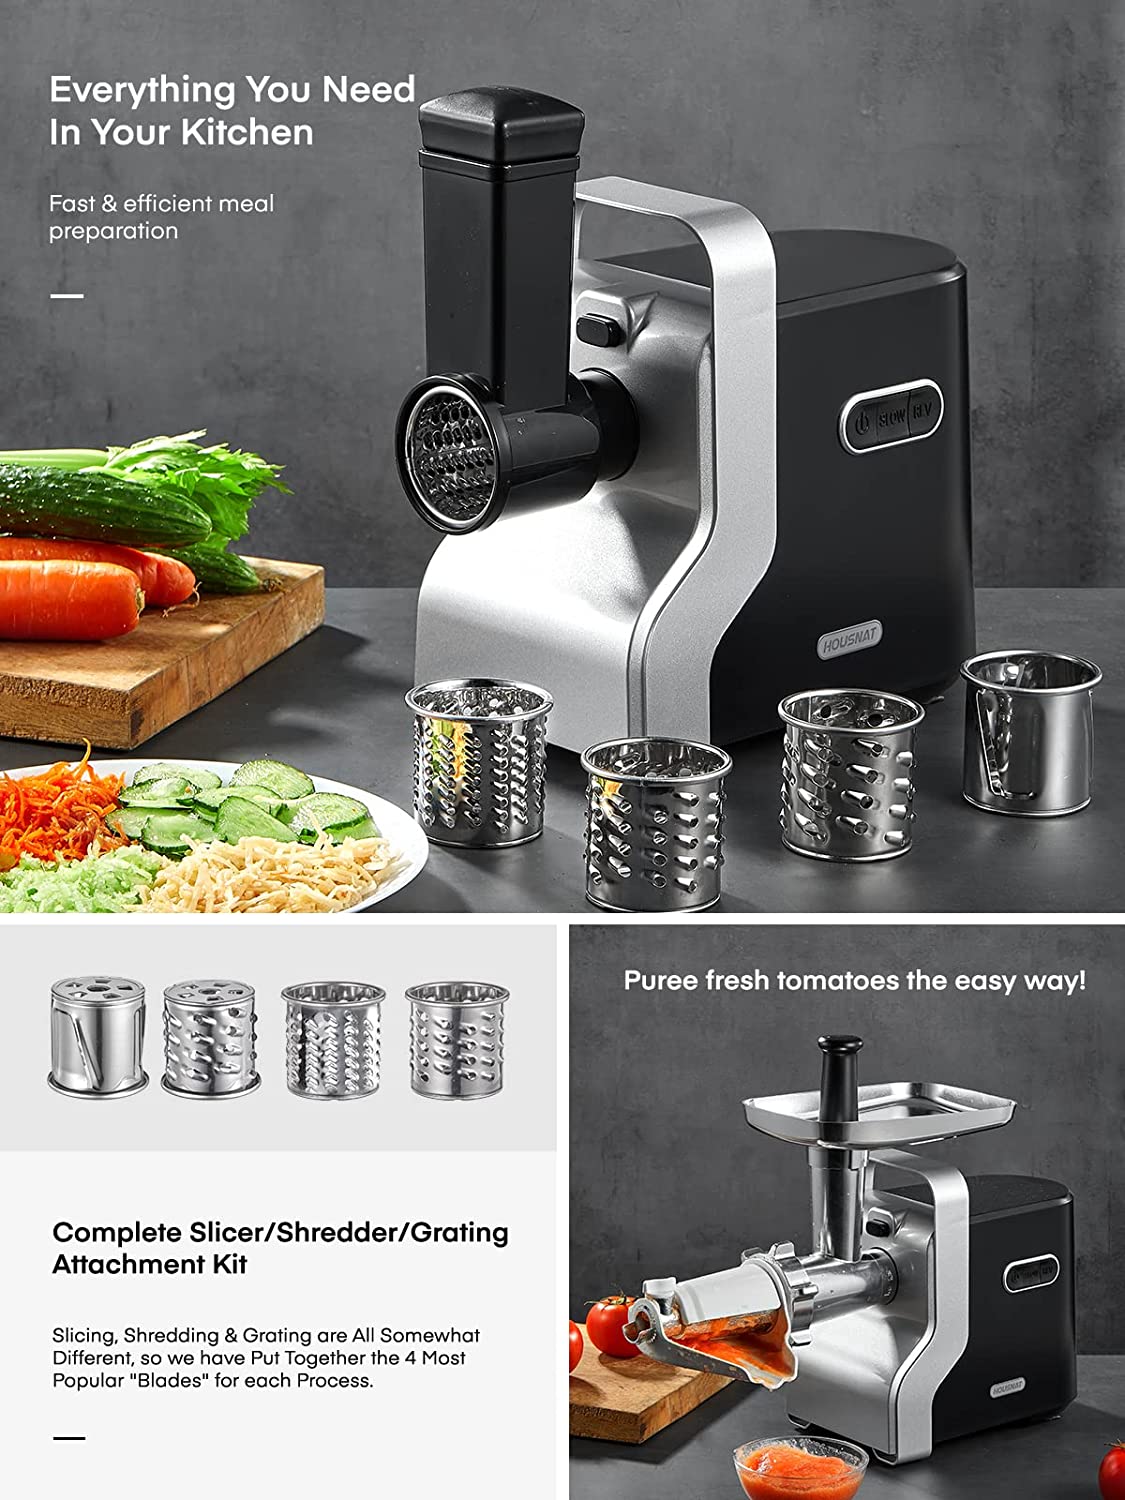 Household Mini Electric Food Meat Grinder Chopper Multifunctional Comm –  RAF Appliances